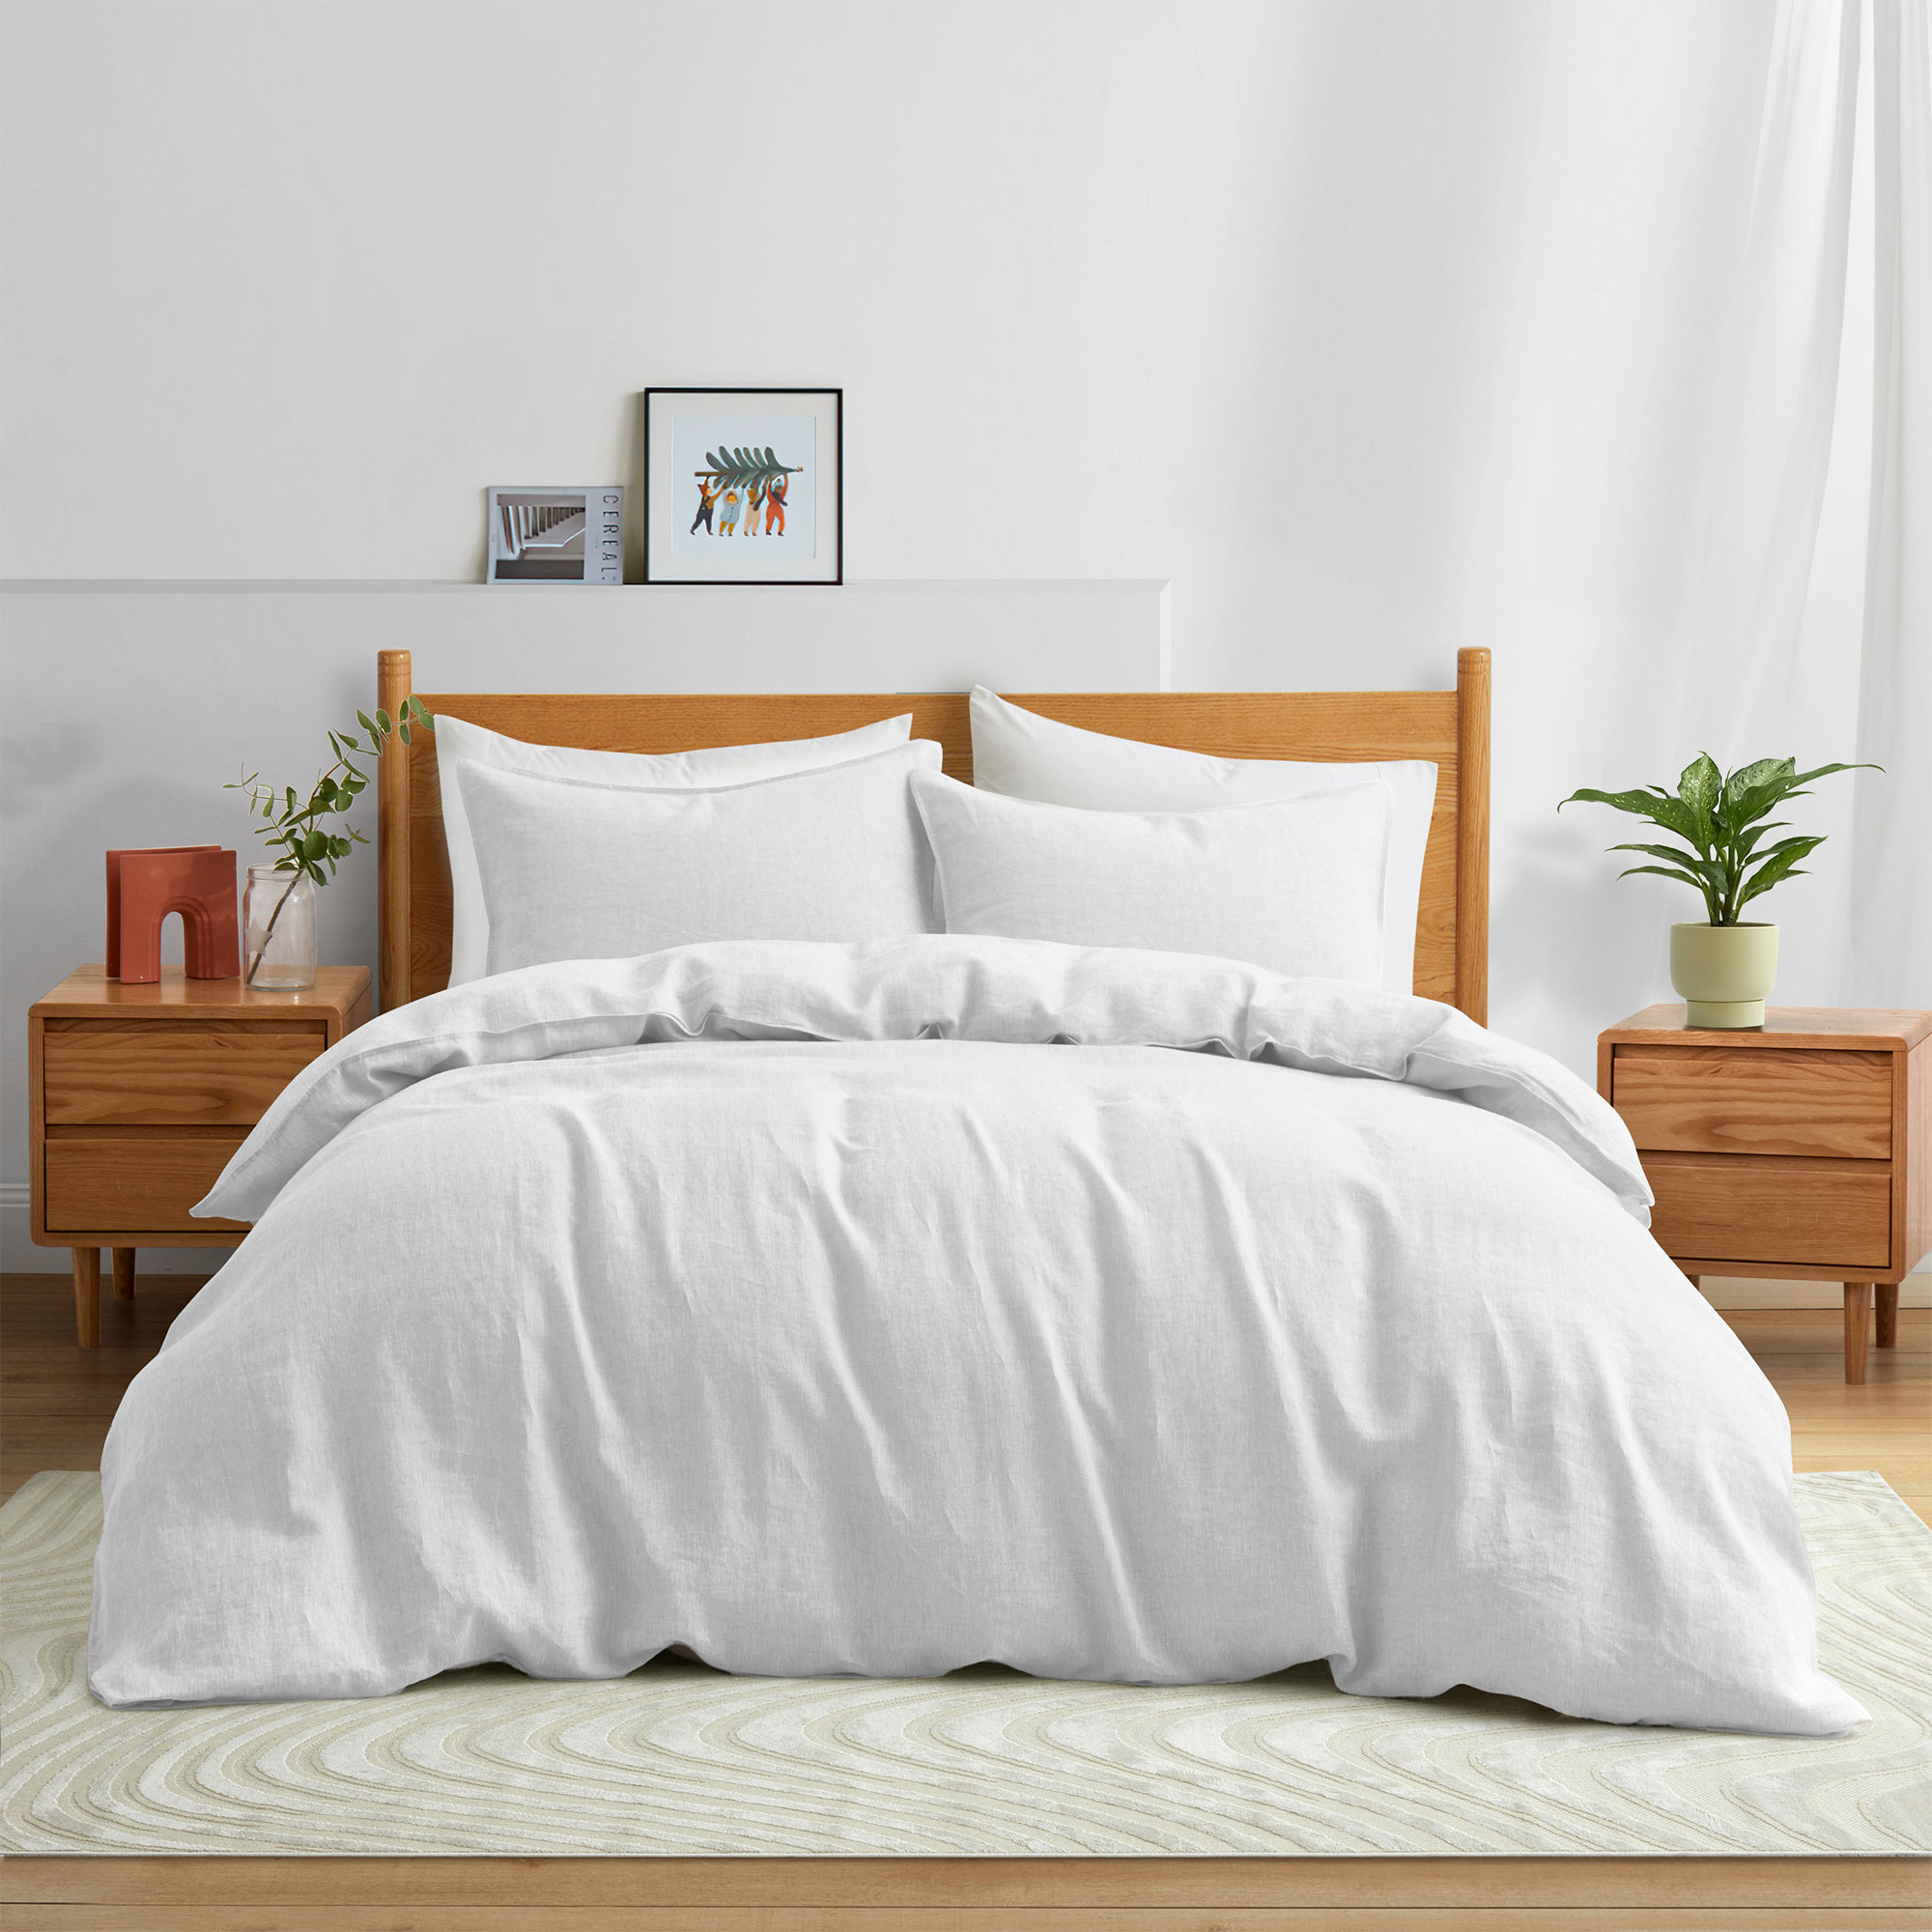 Premium Flax Linen Duvet Cover Set With Pillowcases Moisture Wicking And Breathable - White, King